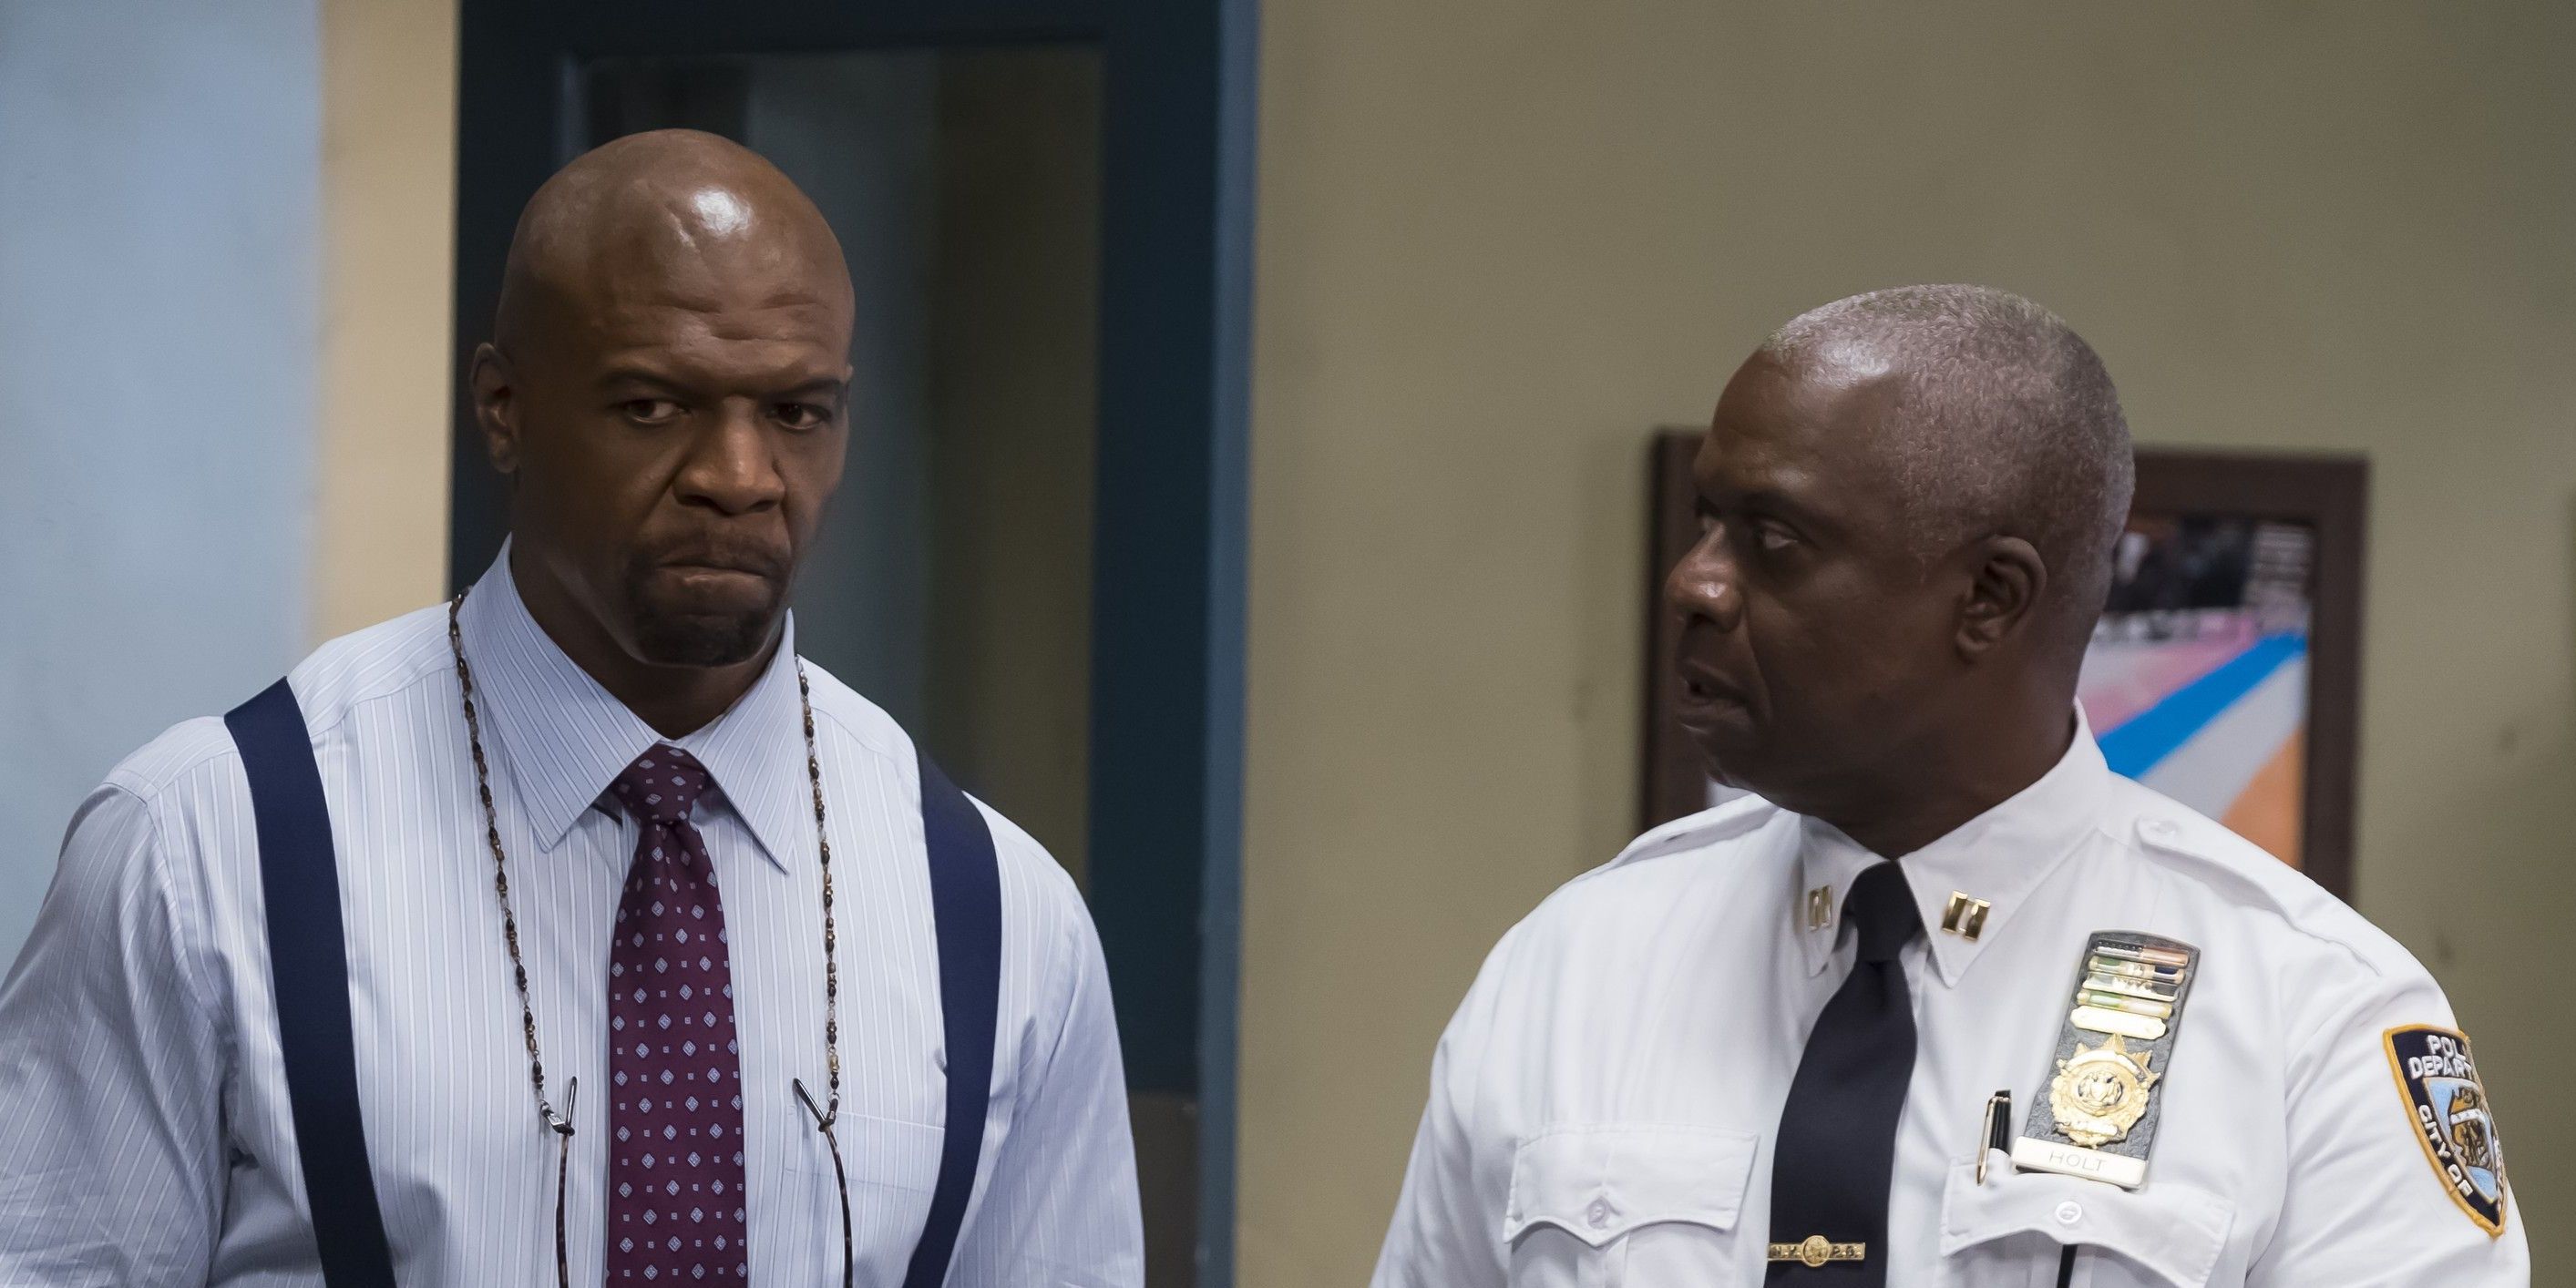 Captain Holt and Terry Jeffords talking in Brooklyn Nine Nine